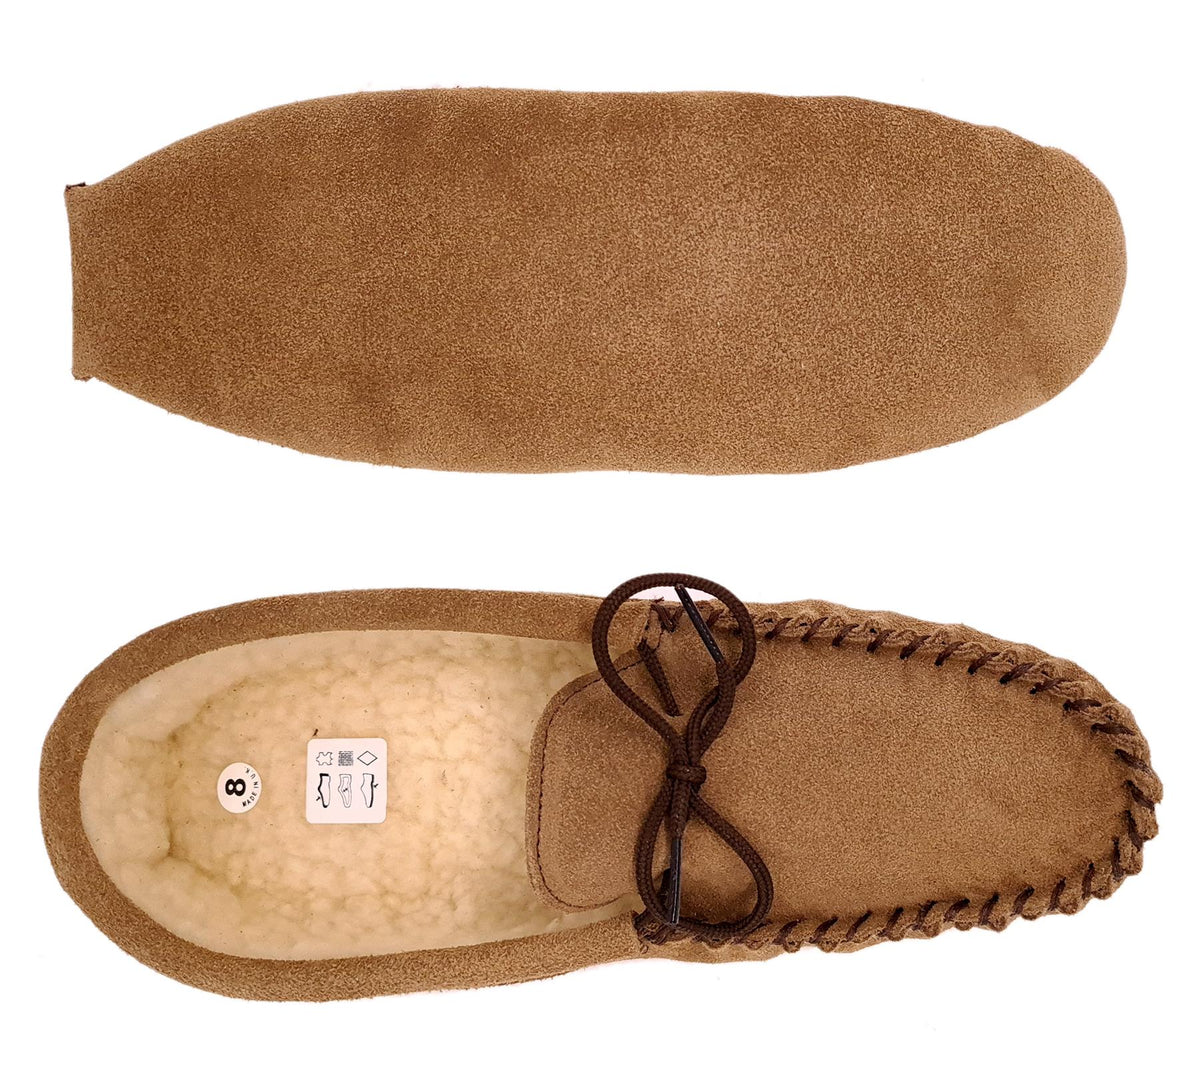 Coopers Men's Fleece Lined Softsole Moccasin Slippers Made In England